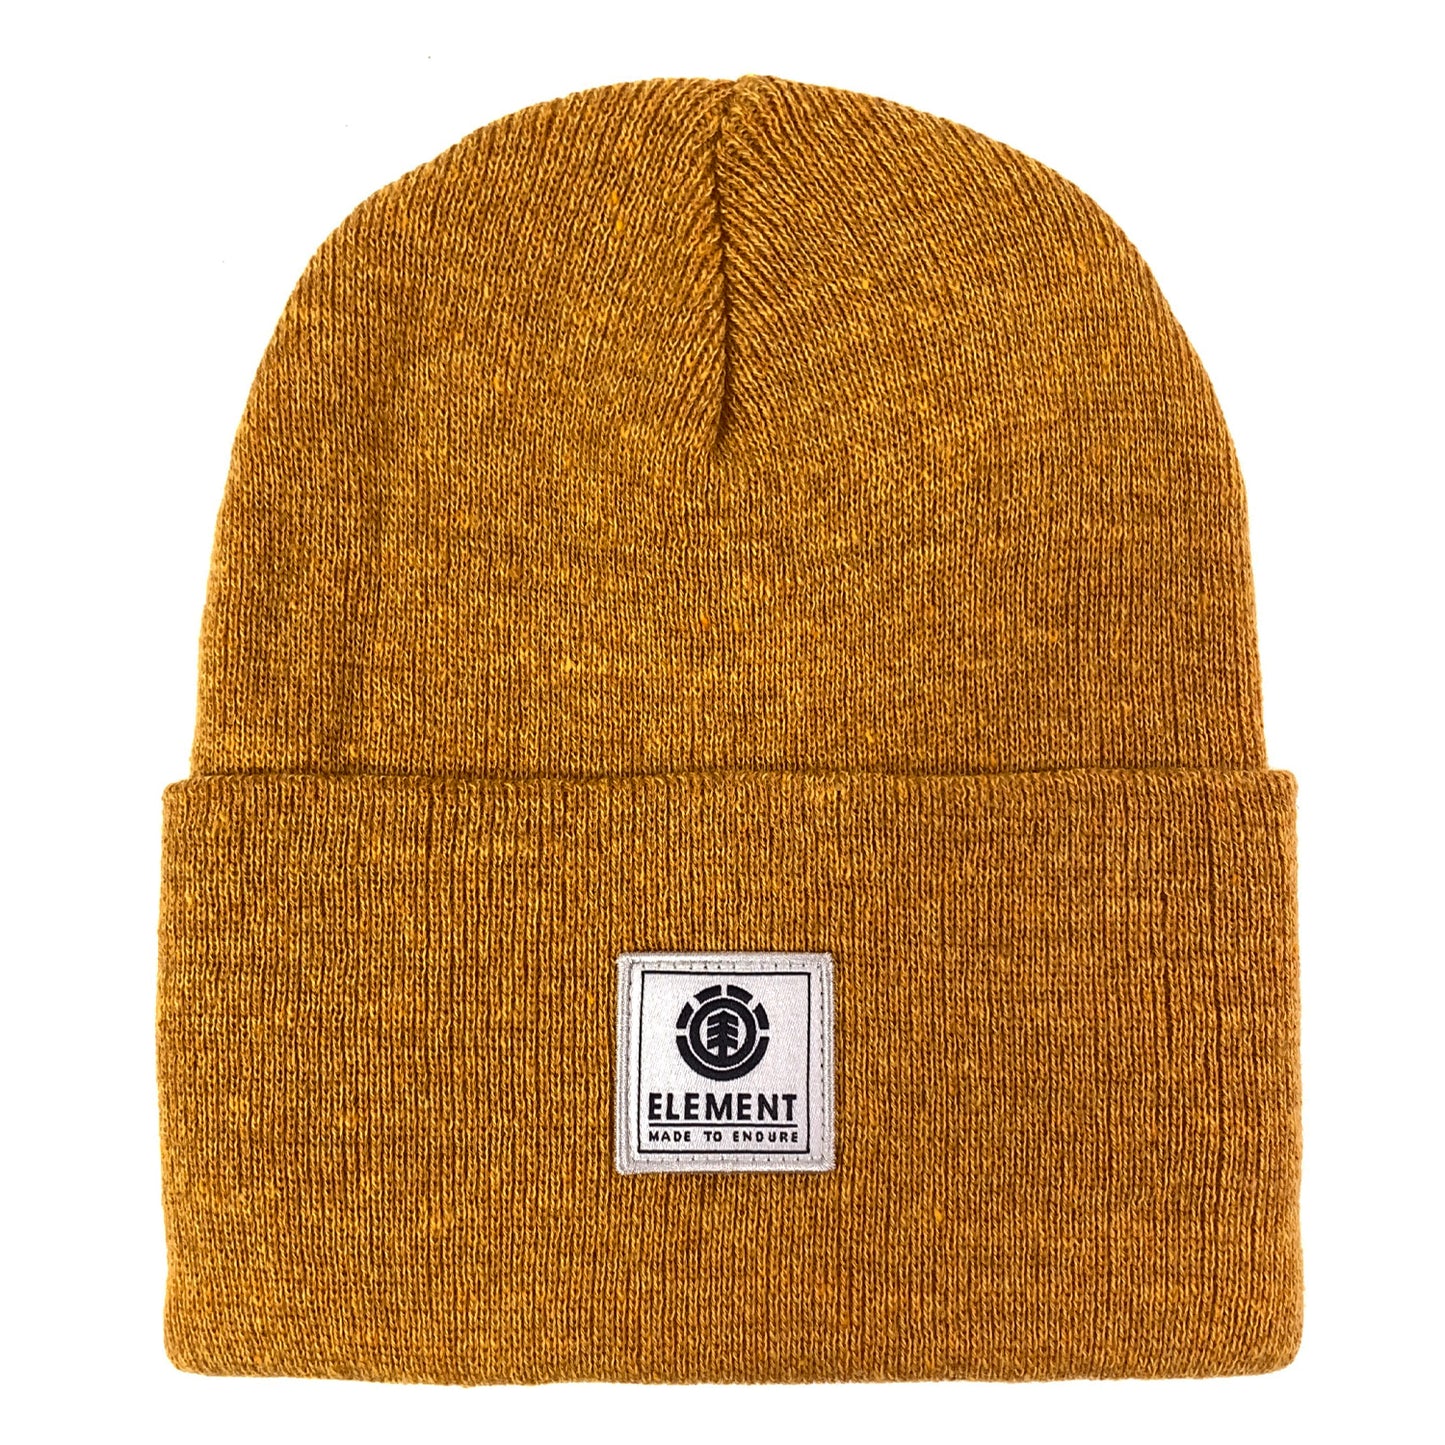 Element Dusk Beanie - Old Gold Heather - Prime Delux Store